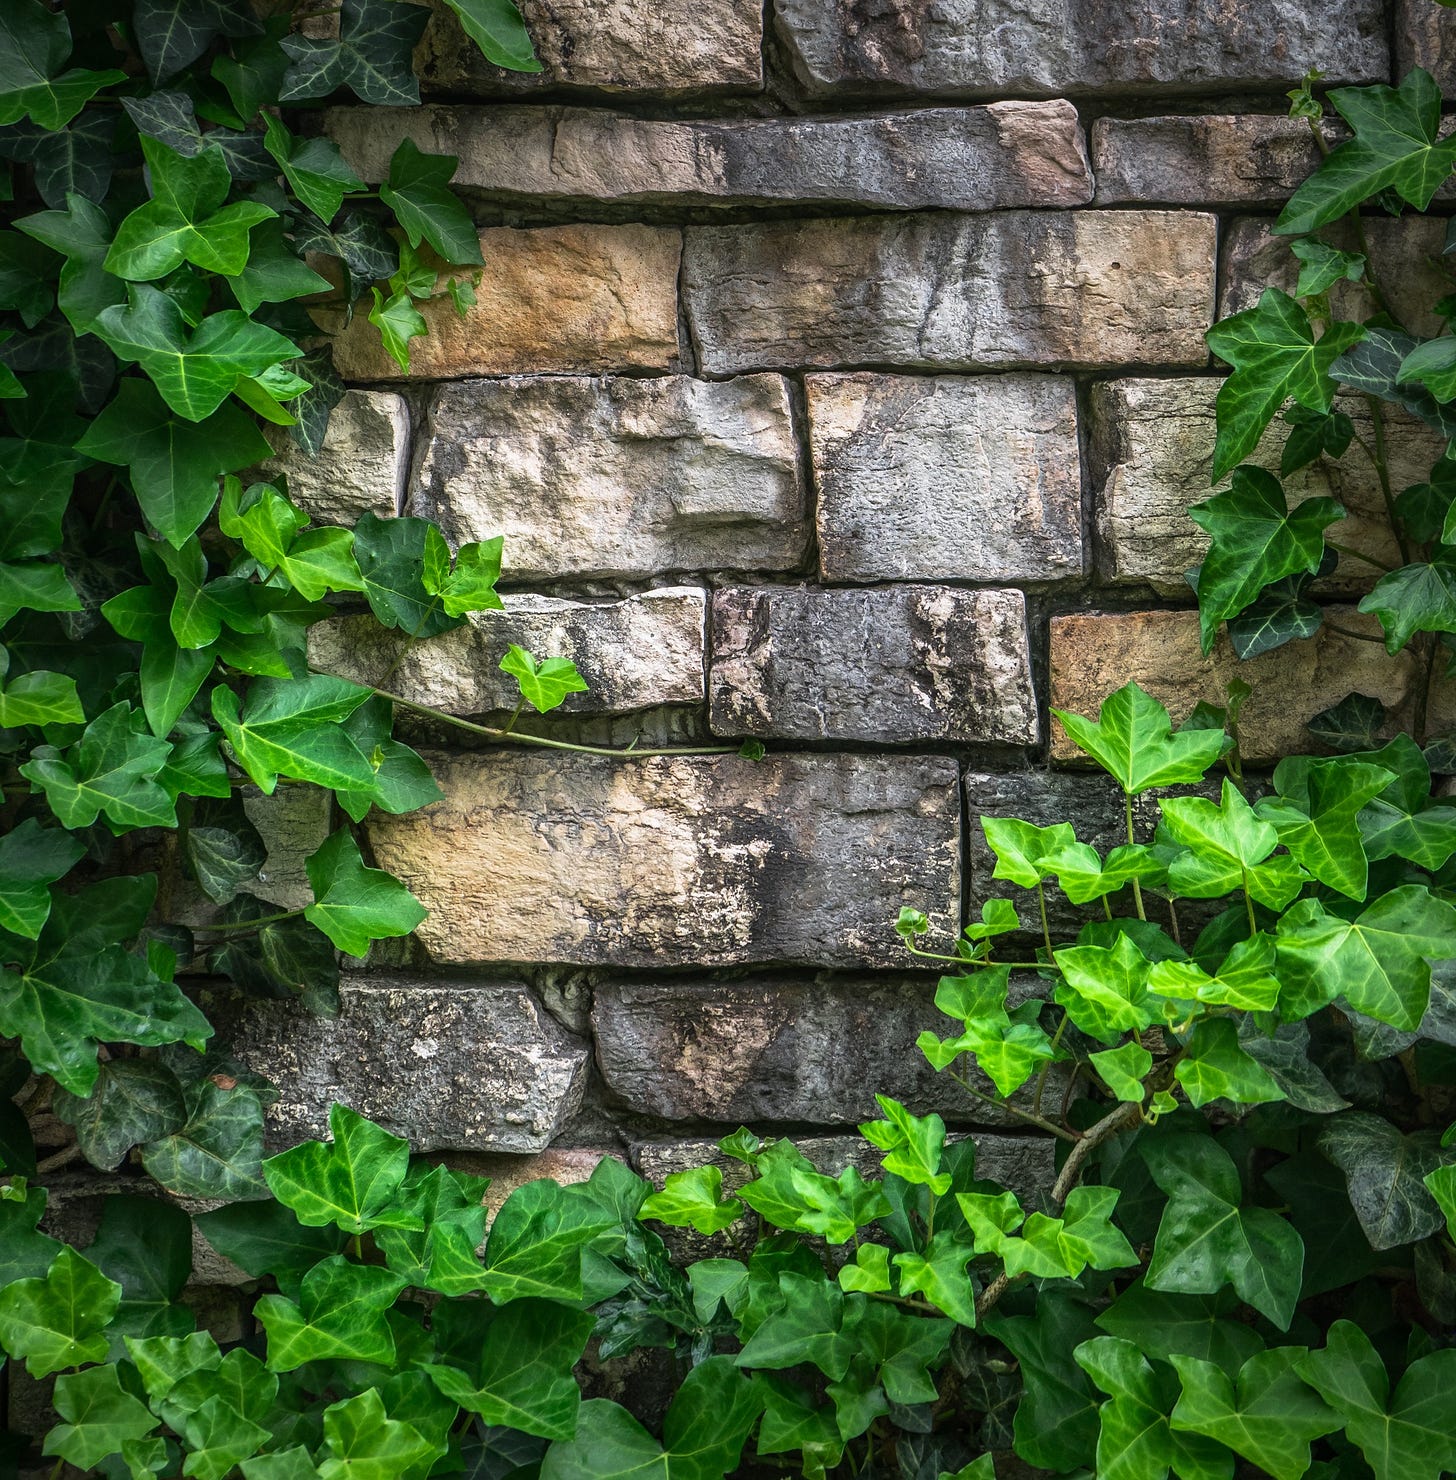 Ivy growing over a brick wall.